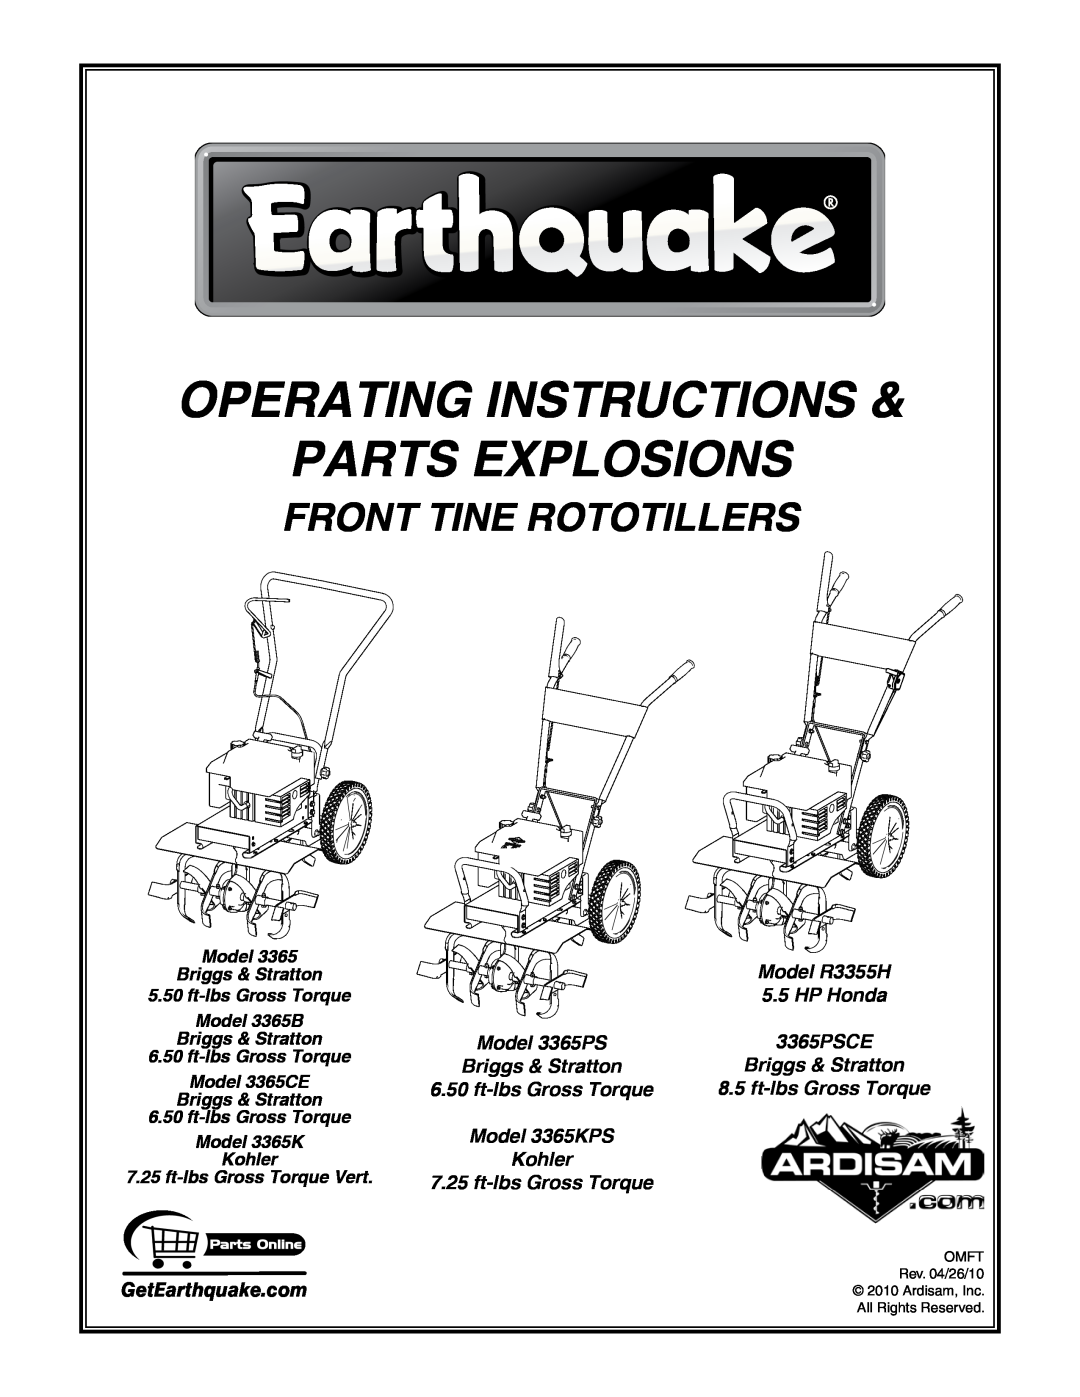 EarthQuake MODEL 3365PS manual FRONT TINE ROTOTILLERs, GetEarthquake.com, OPERATING INSTRUCTIONS Parts EXPLOSIONS, Ardi 